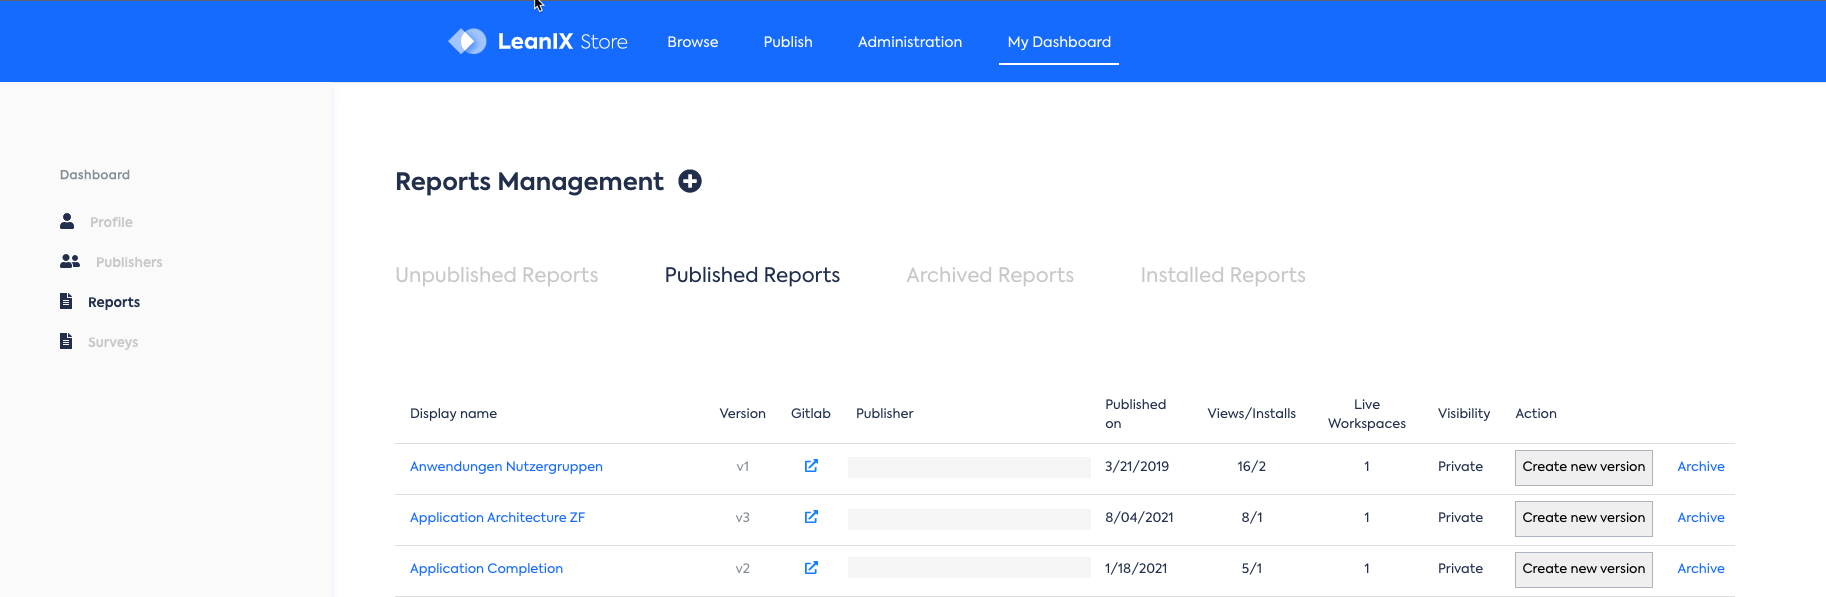 Overview of Published Reports in the LeanIX Store Dashboard